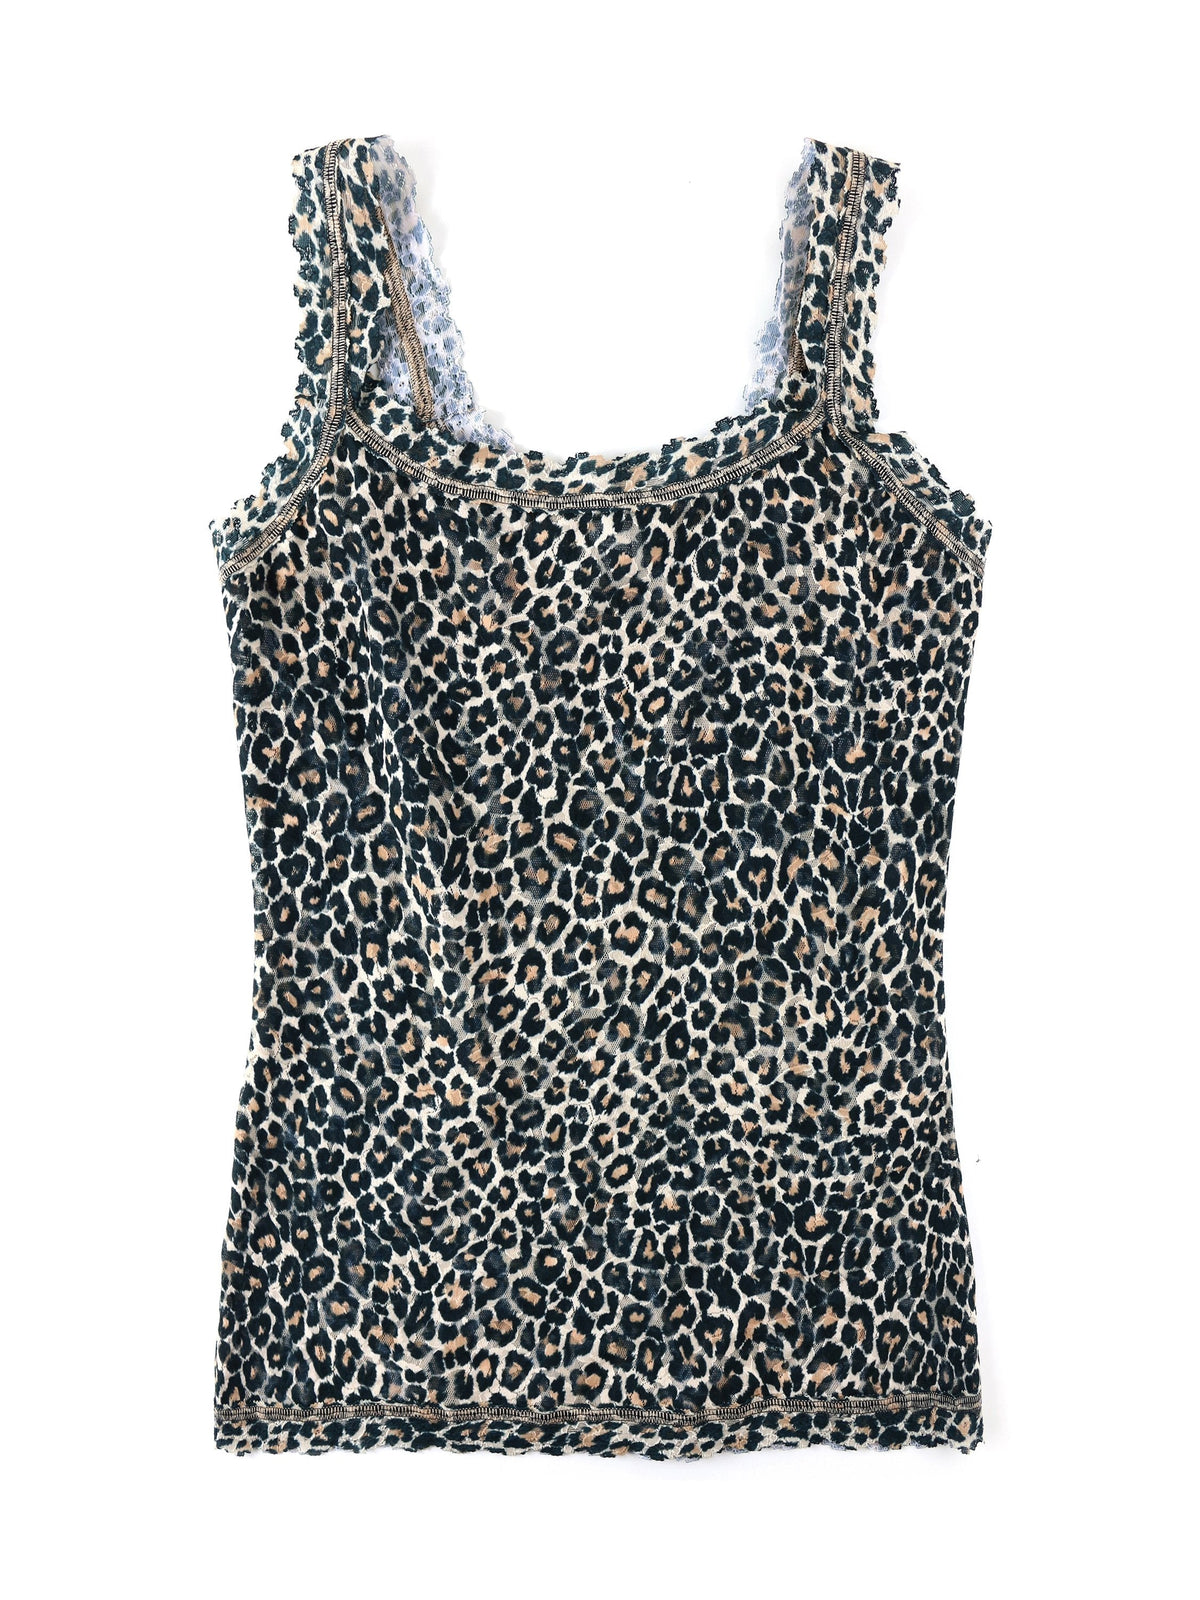 Printed Signature Lace Classic Cami Classic Leopard | Hanky Panky